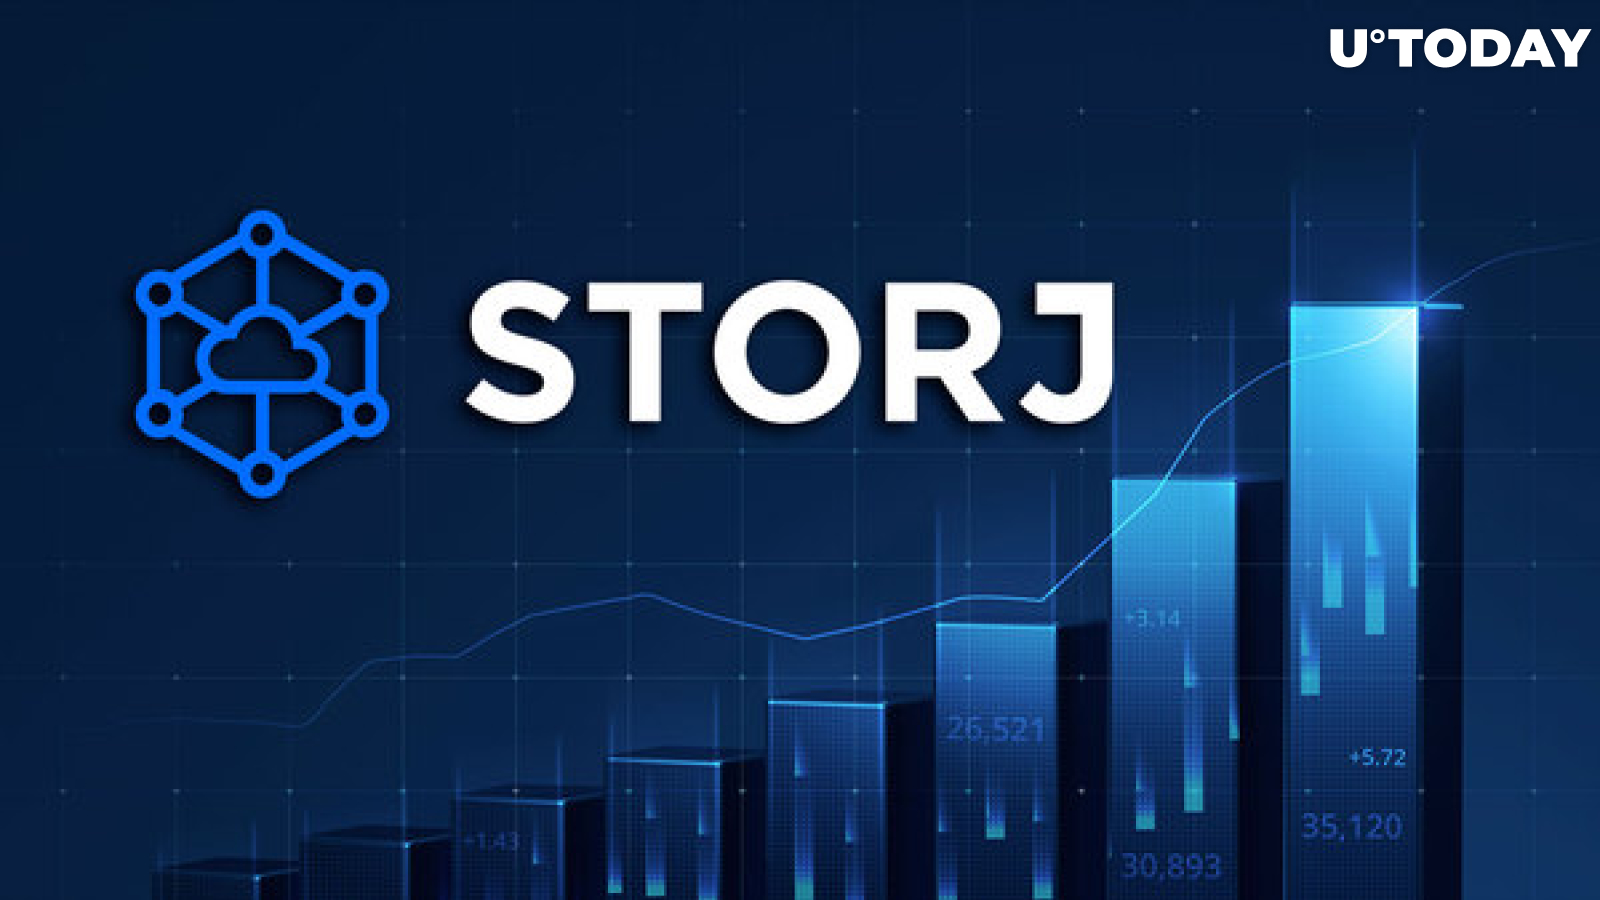 Storj (STORJ) Price Surges by 16% in 1 Hour, Can It Do More?